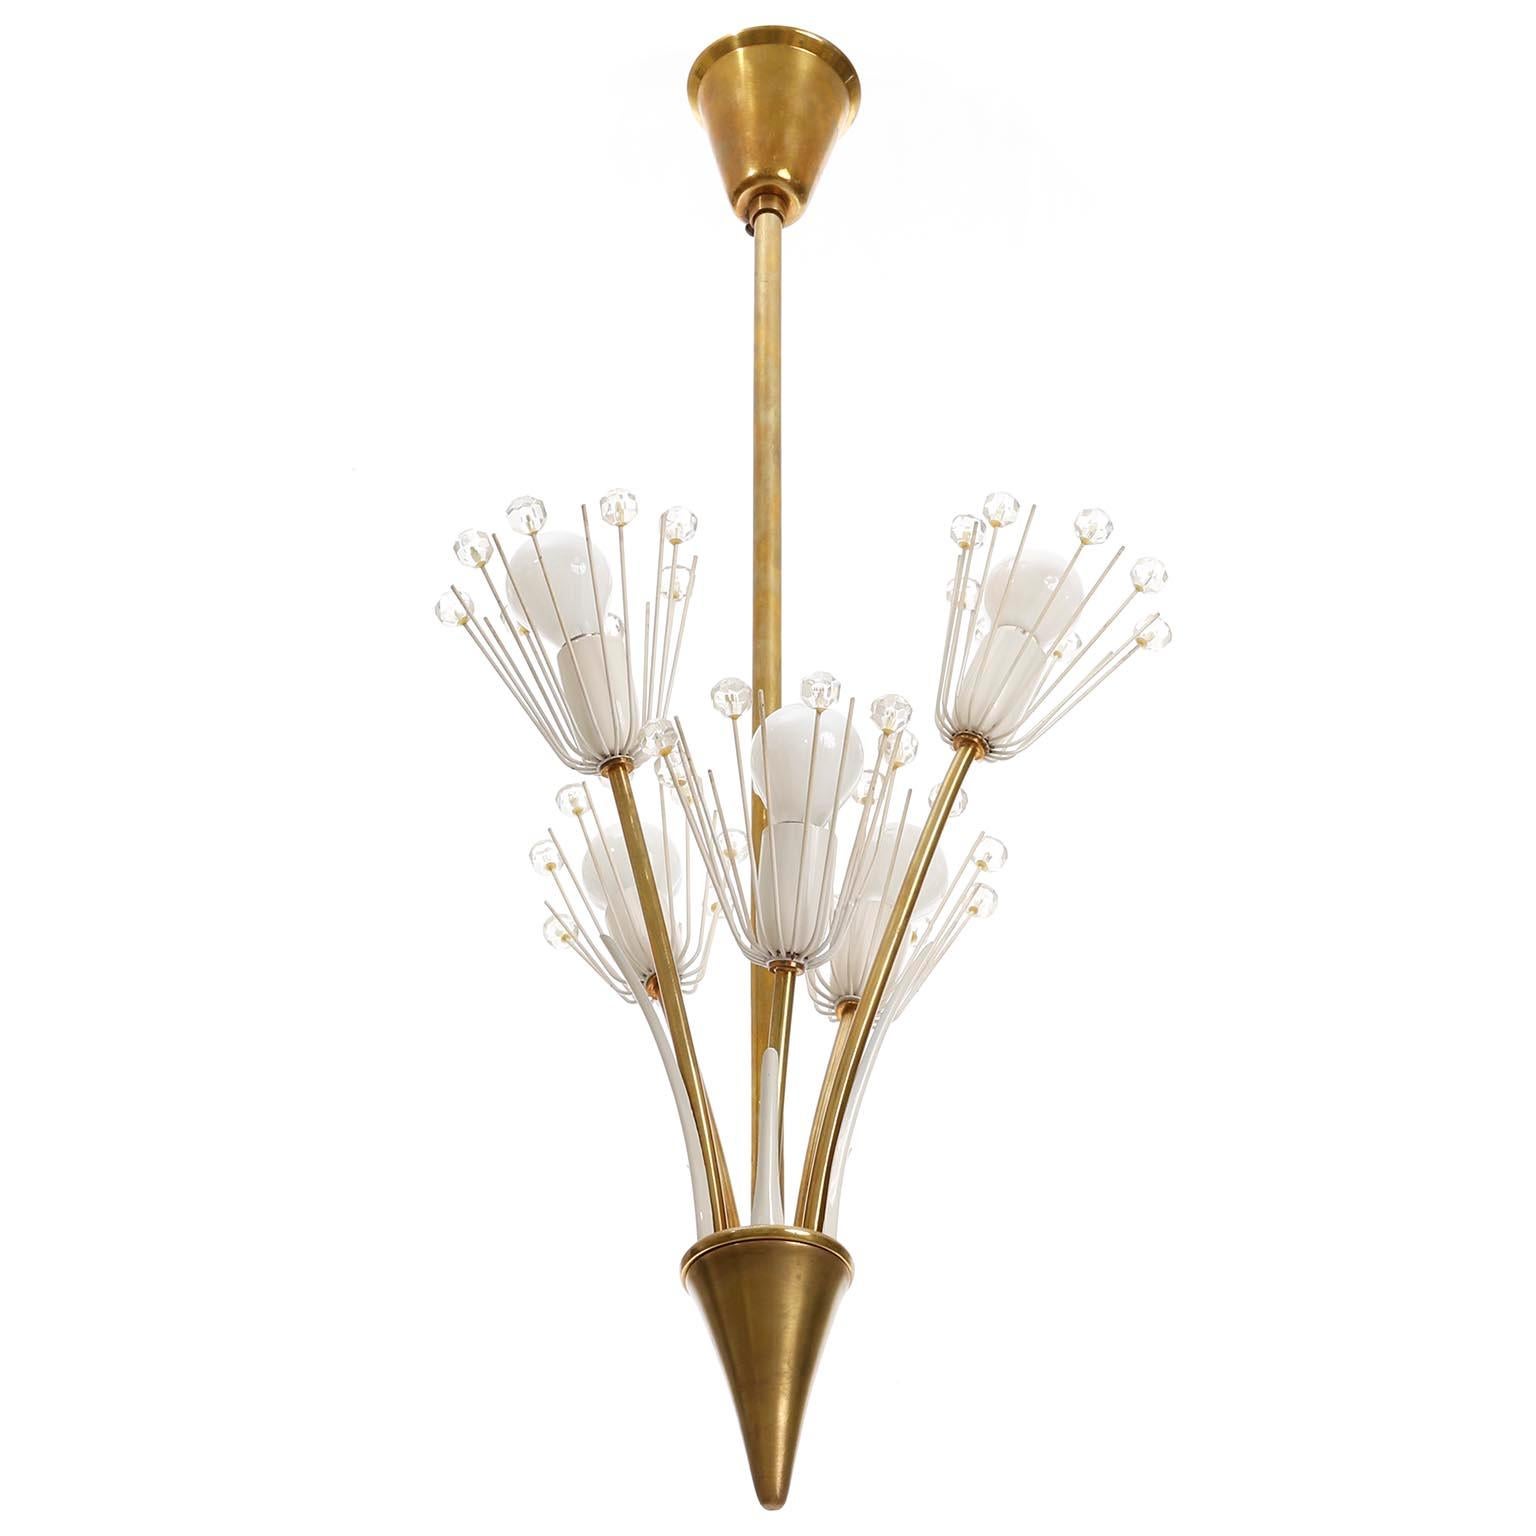 A beautiful Viennese pendant lamp in the form of a bouquet of flowers by Emil Stejnar for Rupert Nikoll, Vienna, Austria, from the middle of the century, around 1960 (late 1950s or early 1960s).
Emil Stejnar designed this kind of light in 1955 for